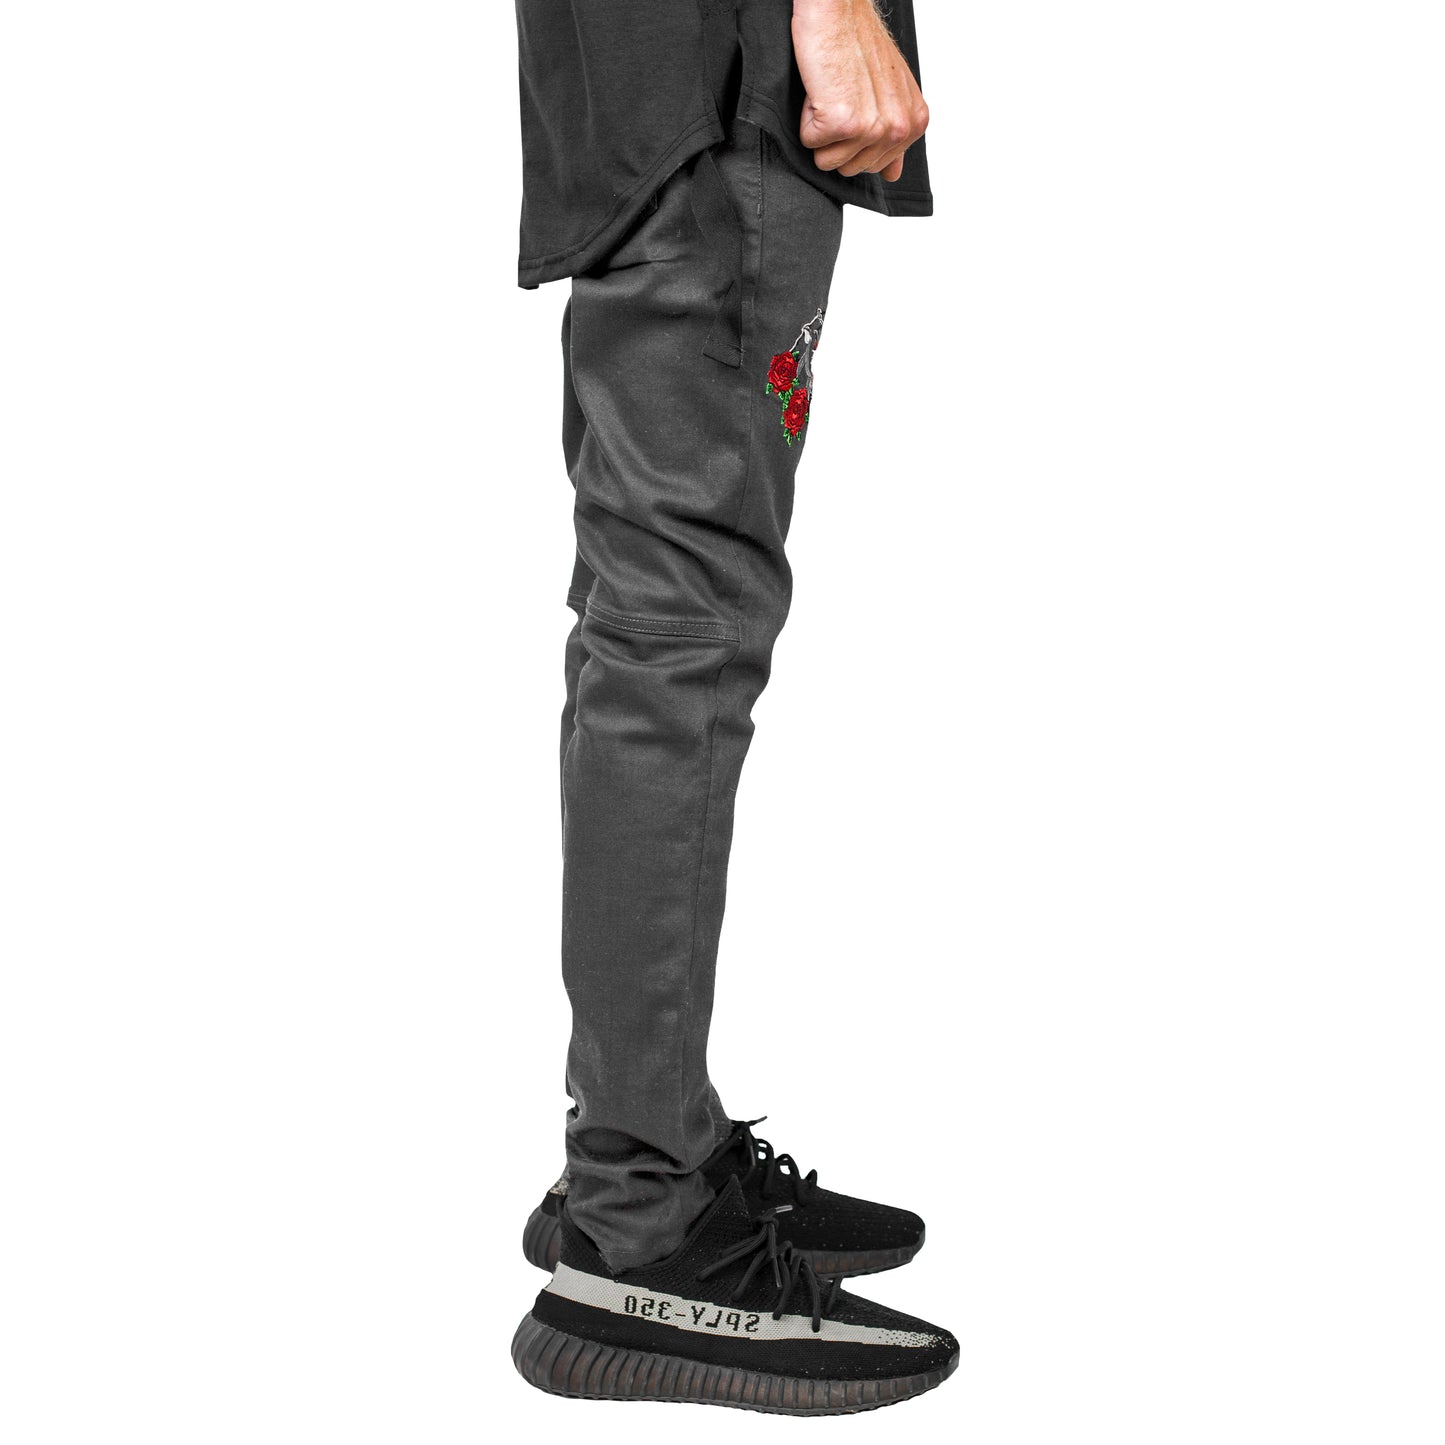 Panther Jeans : Grey